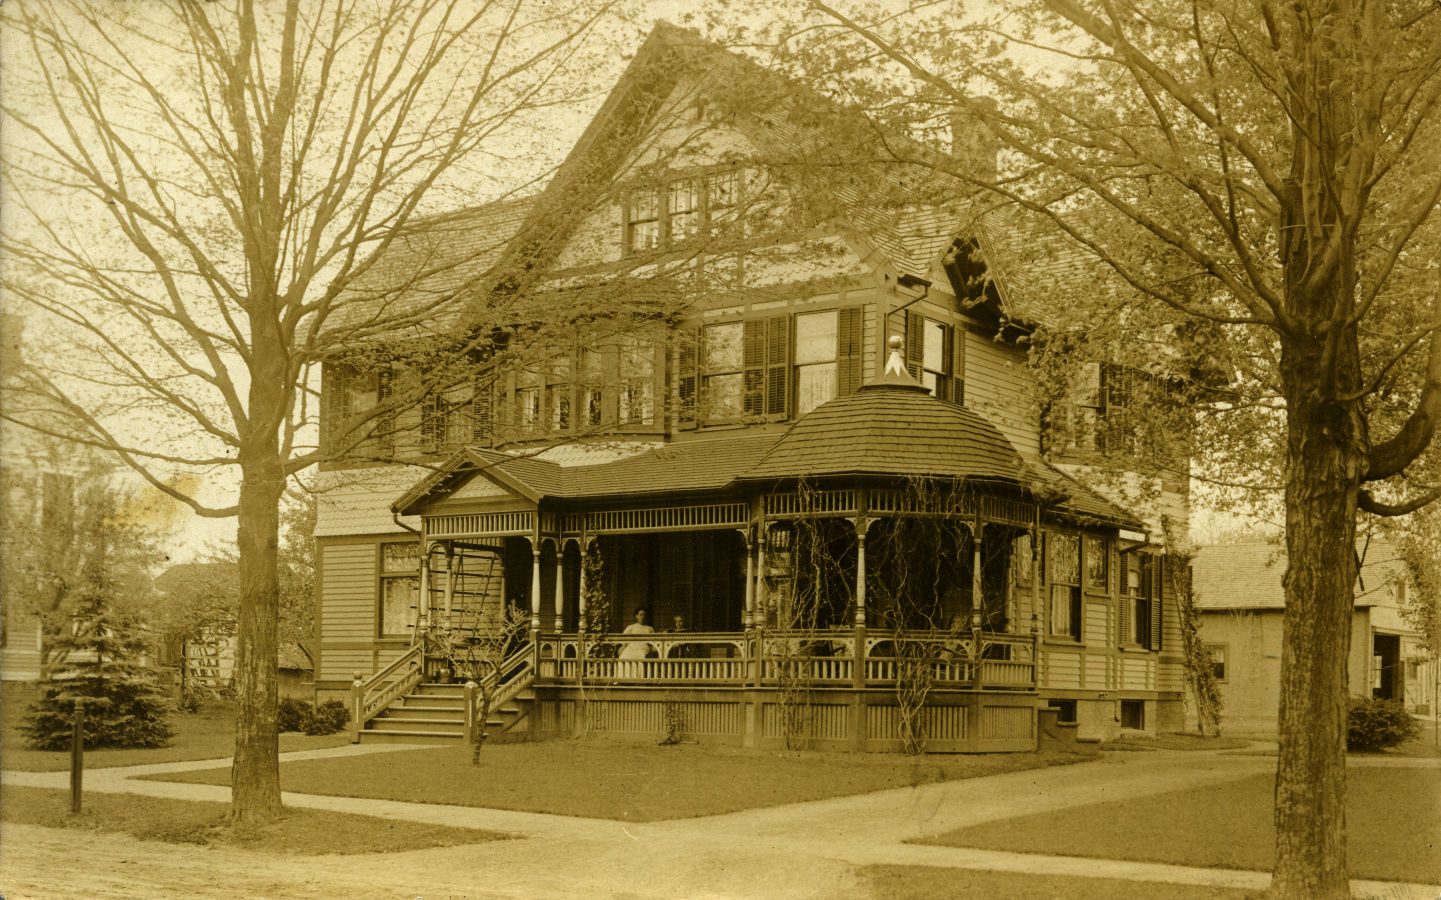 Unknown house with a gazebo-style front porch